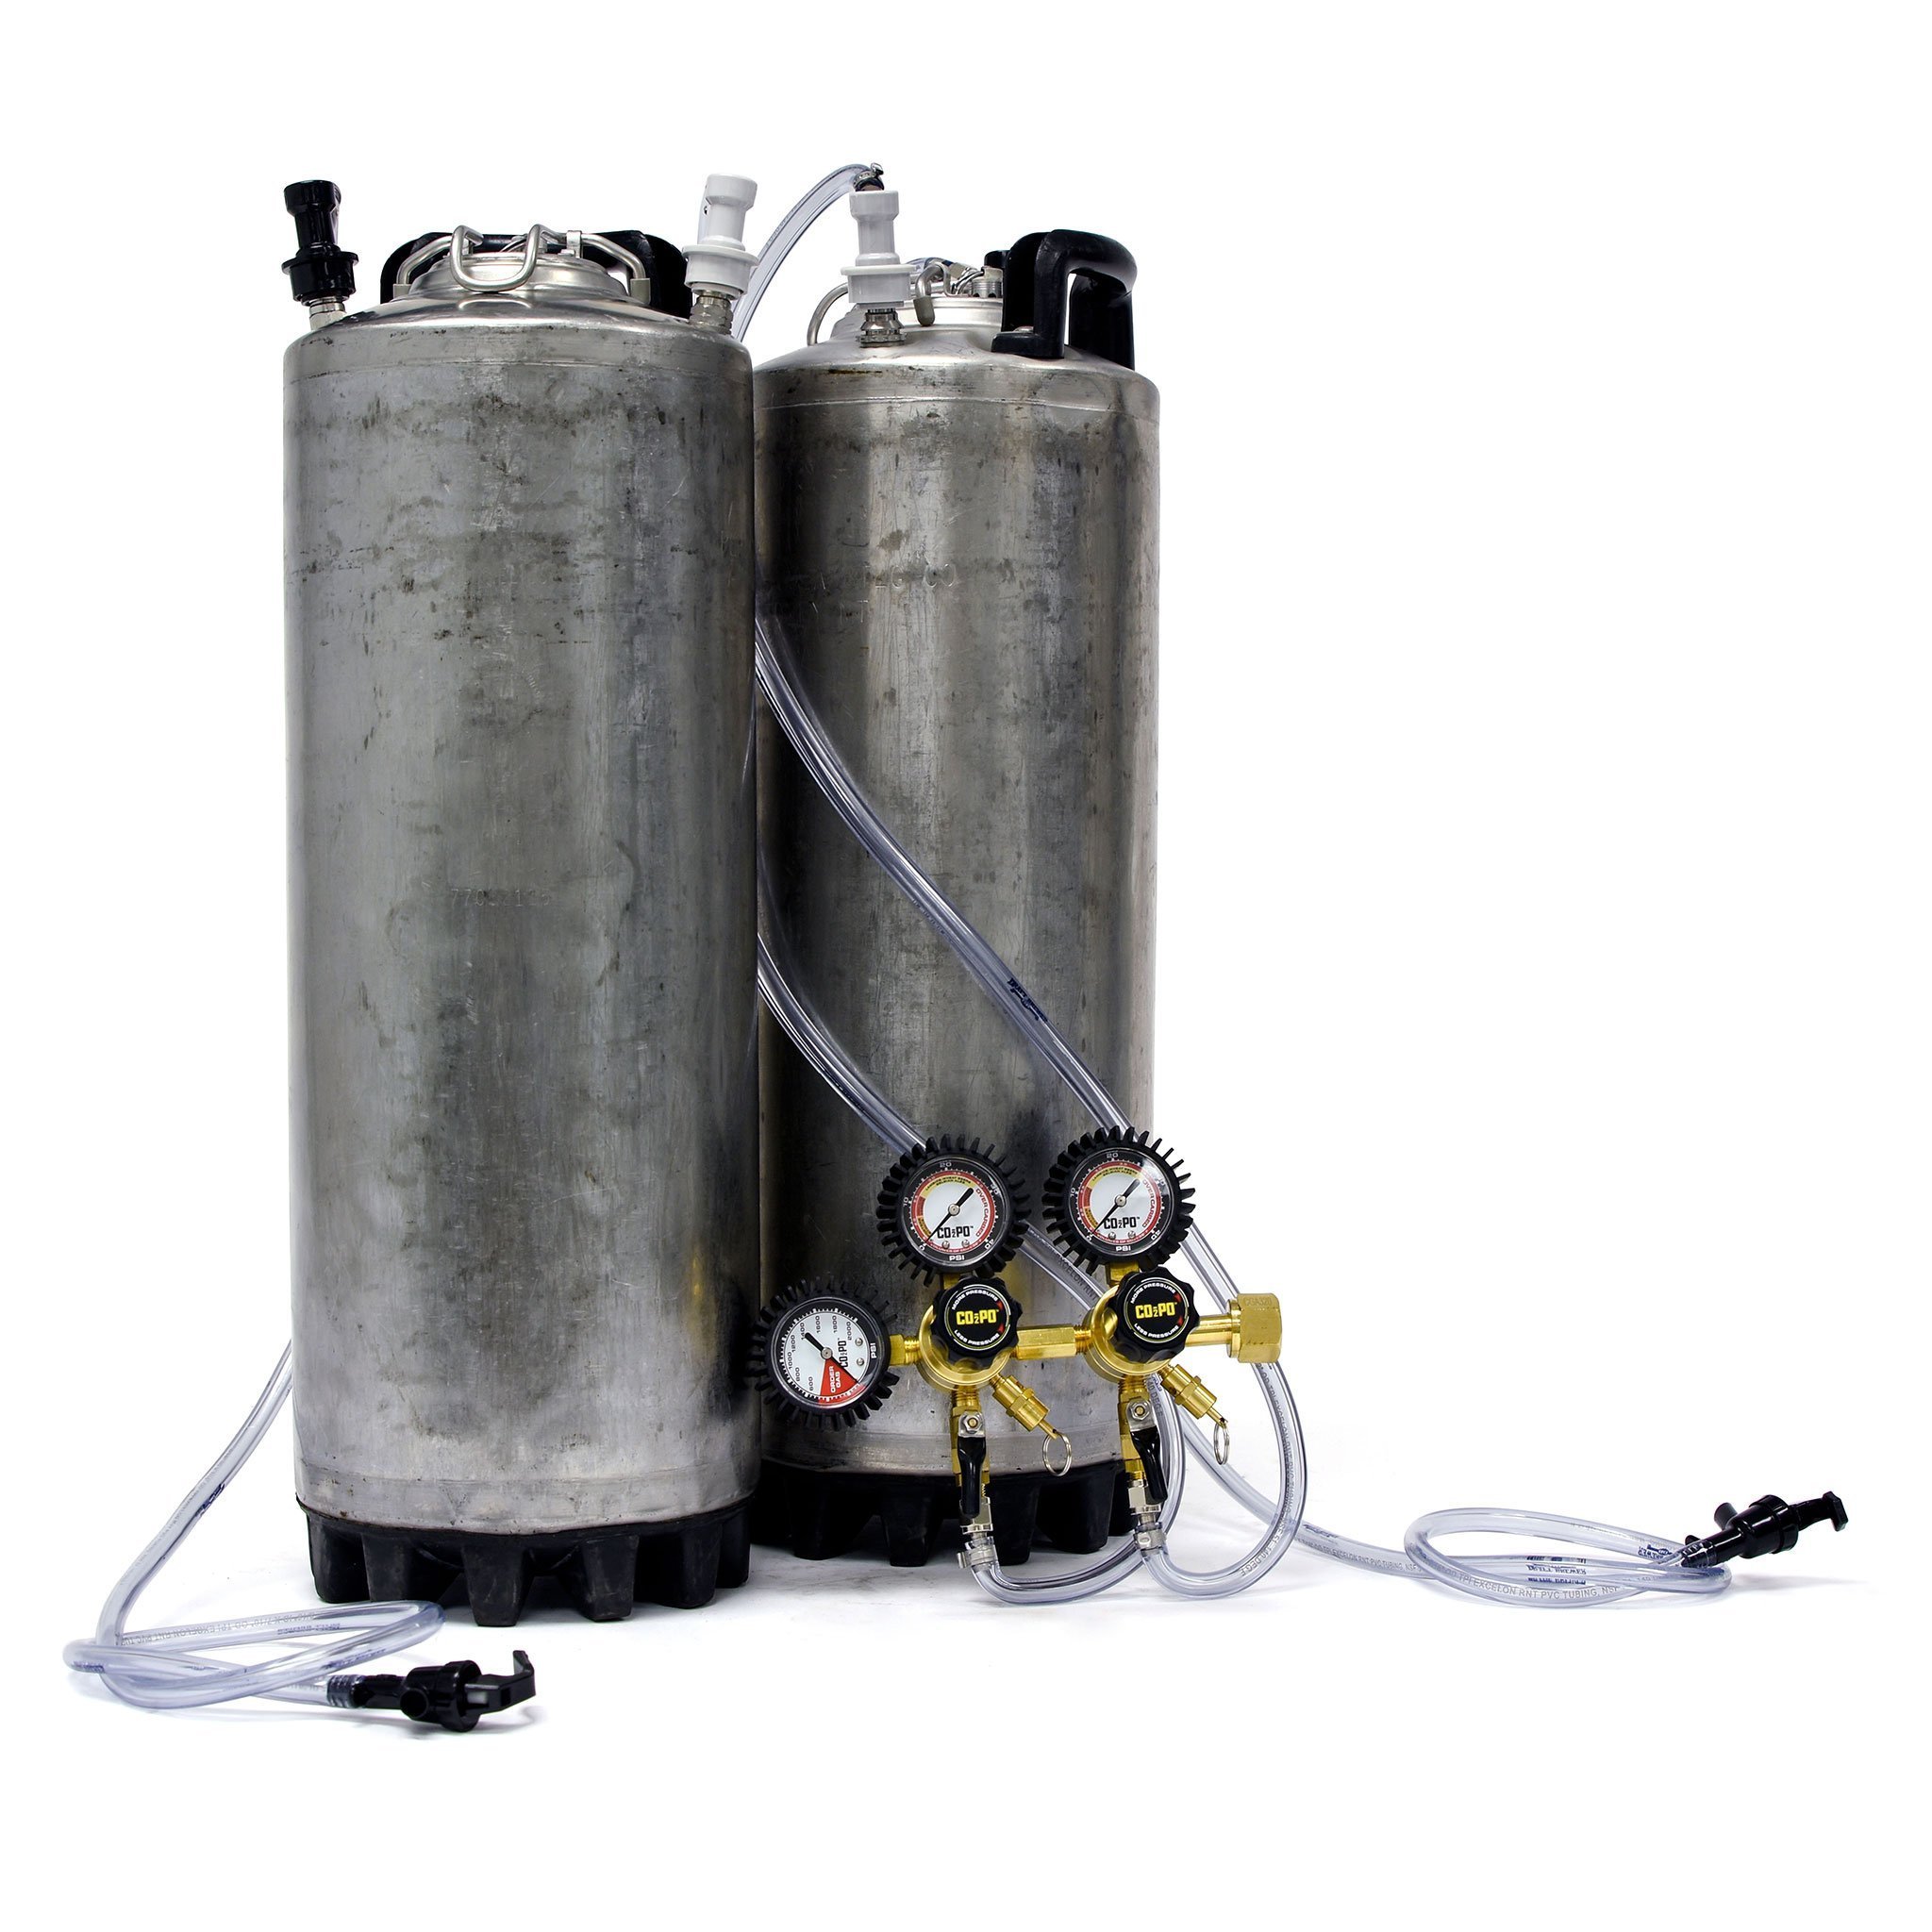 Image of Reconditioned Dual Keg System